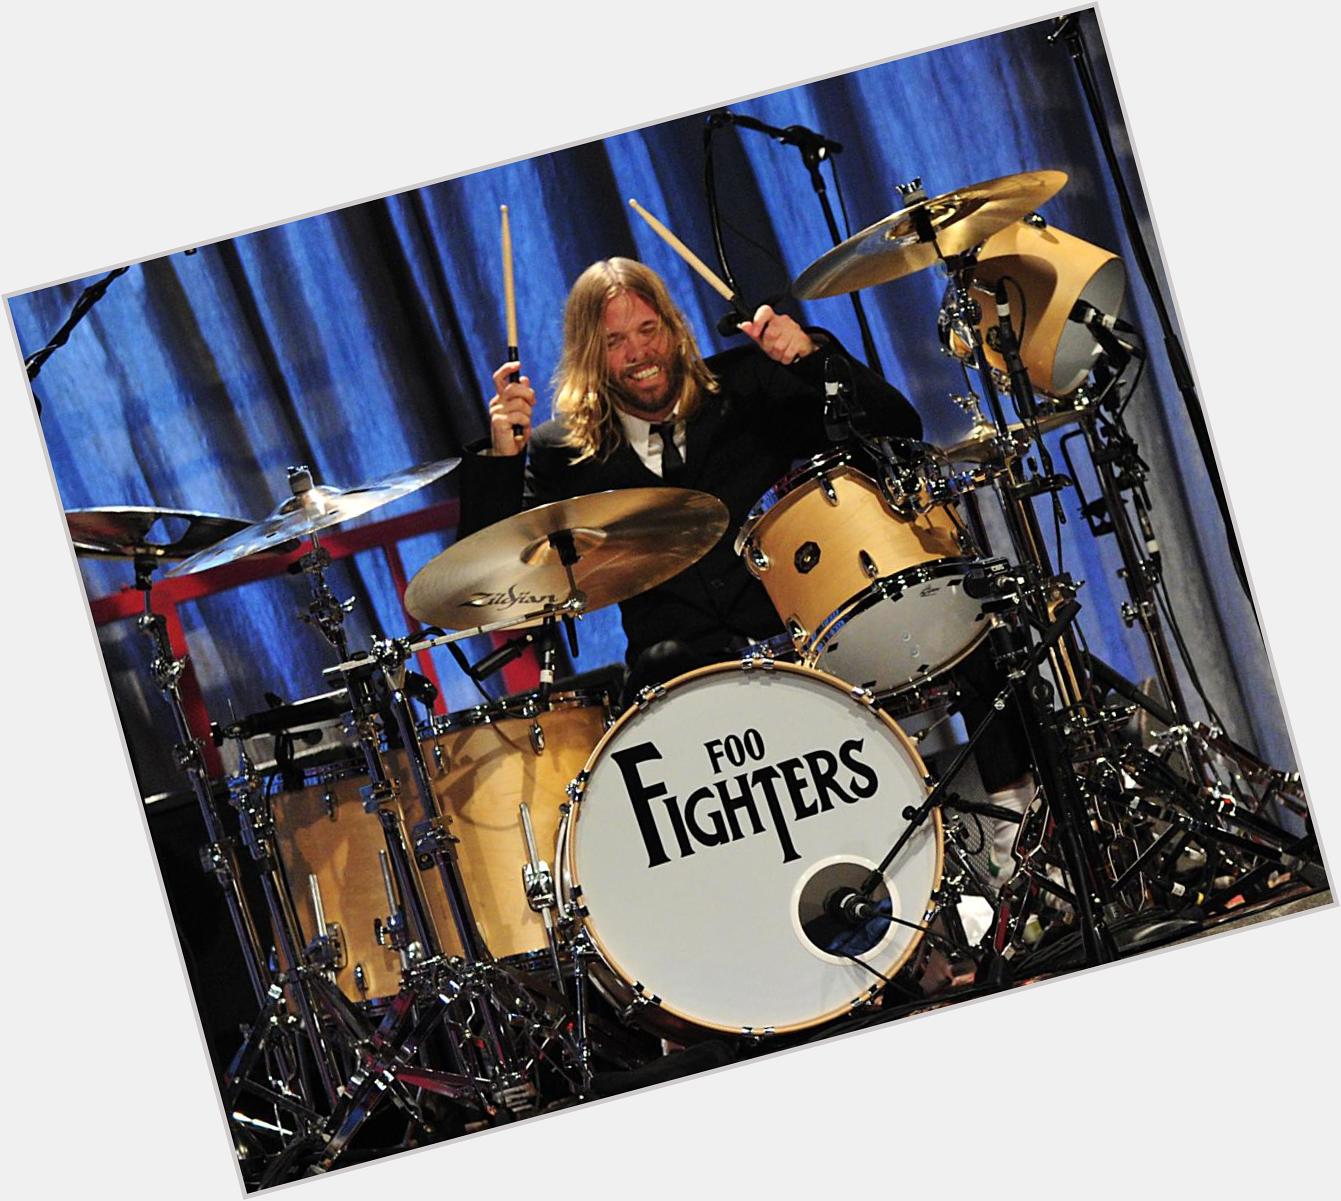 Today is the birthday of one of the best drummers in the world. Happy Birthday Taylor Hawkins! 